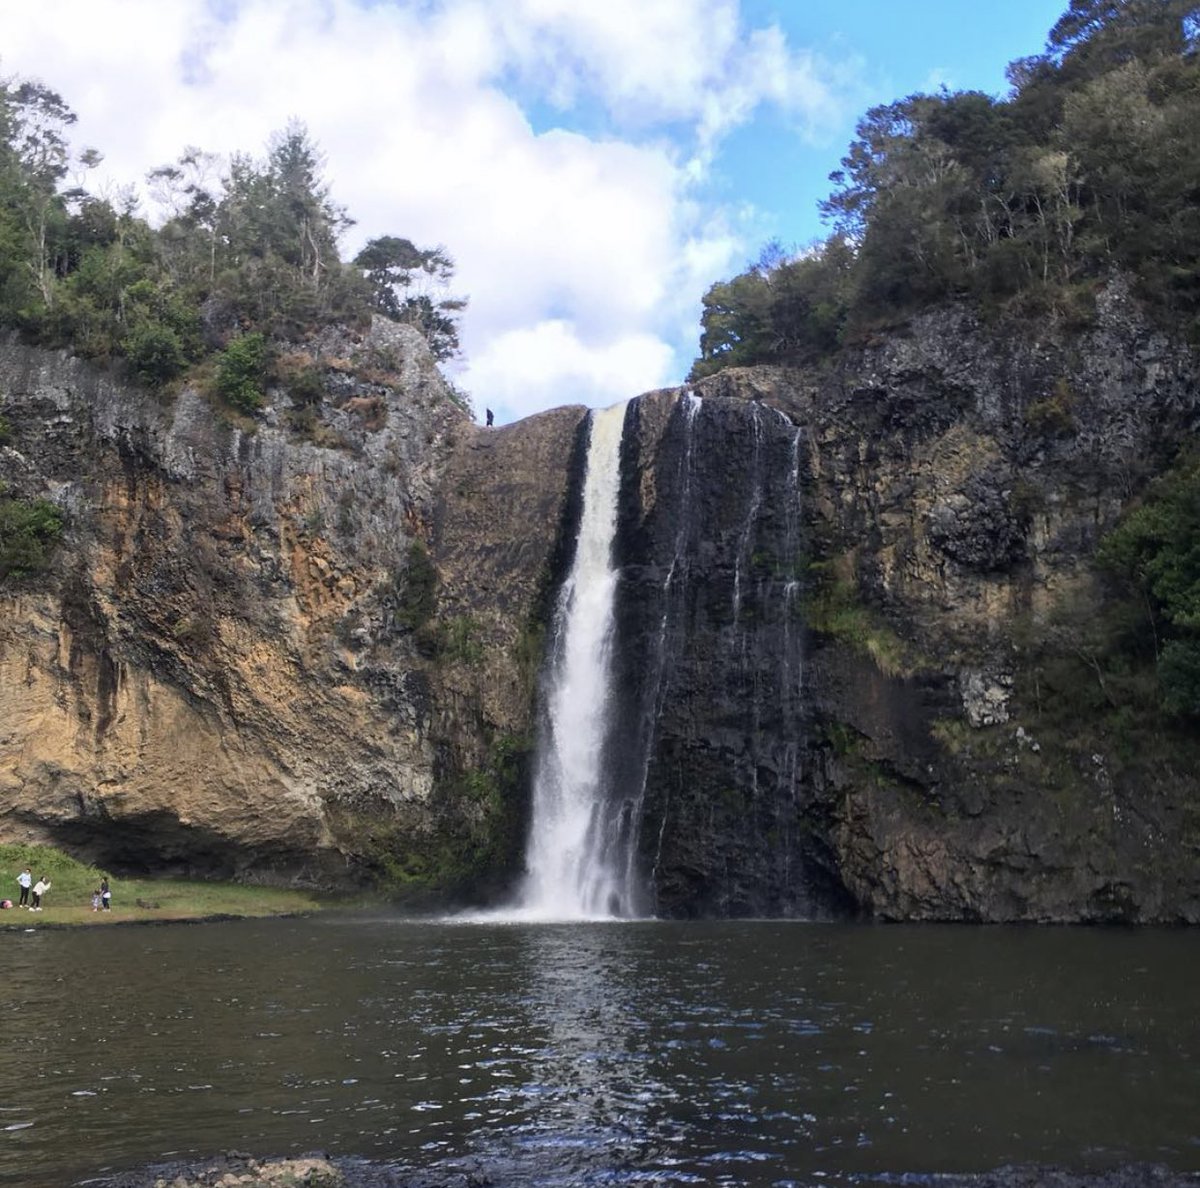 hunua falls! it was my entry into exploring everything the southside had to offer! (going under the waterfall is wild and so much fun!) 